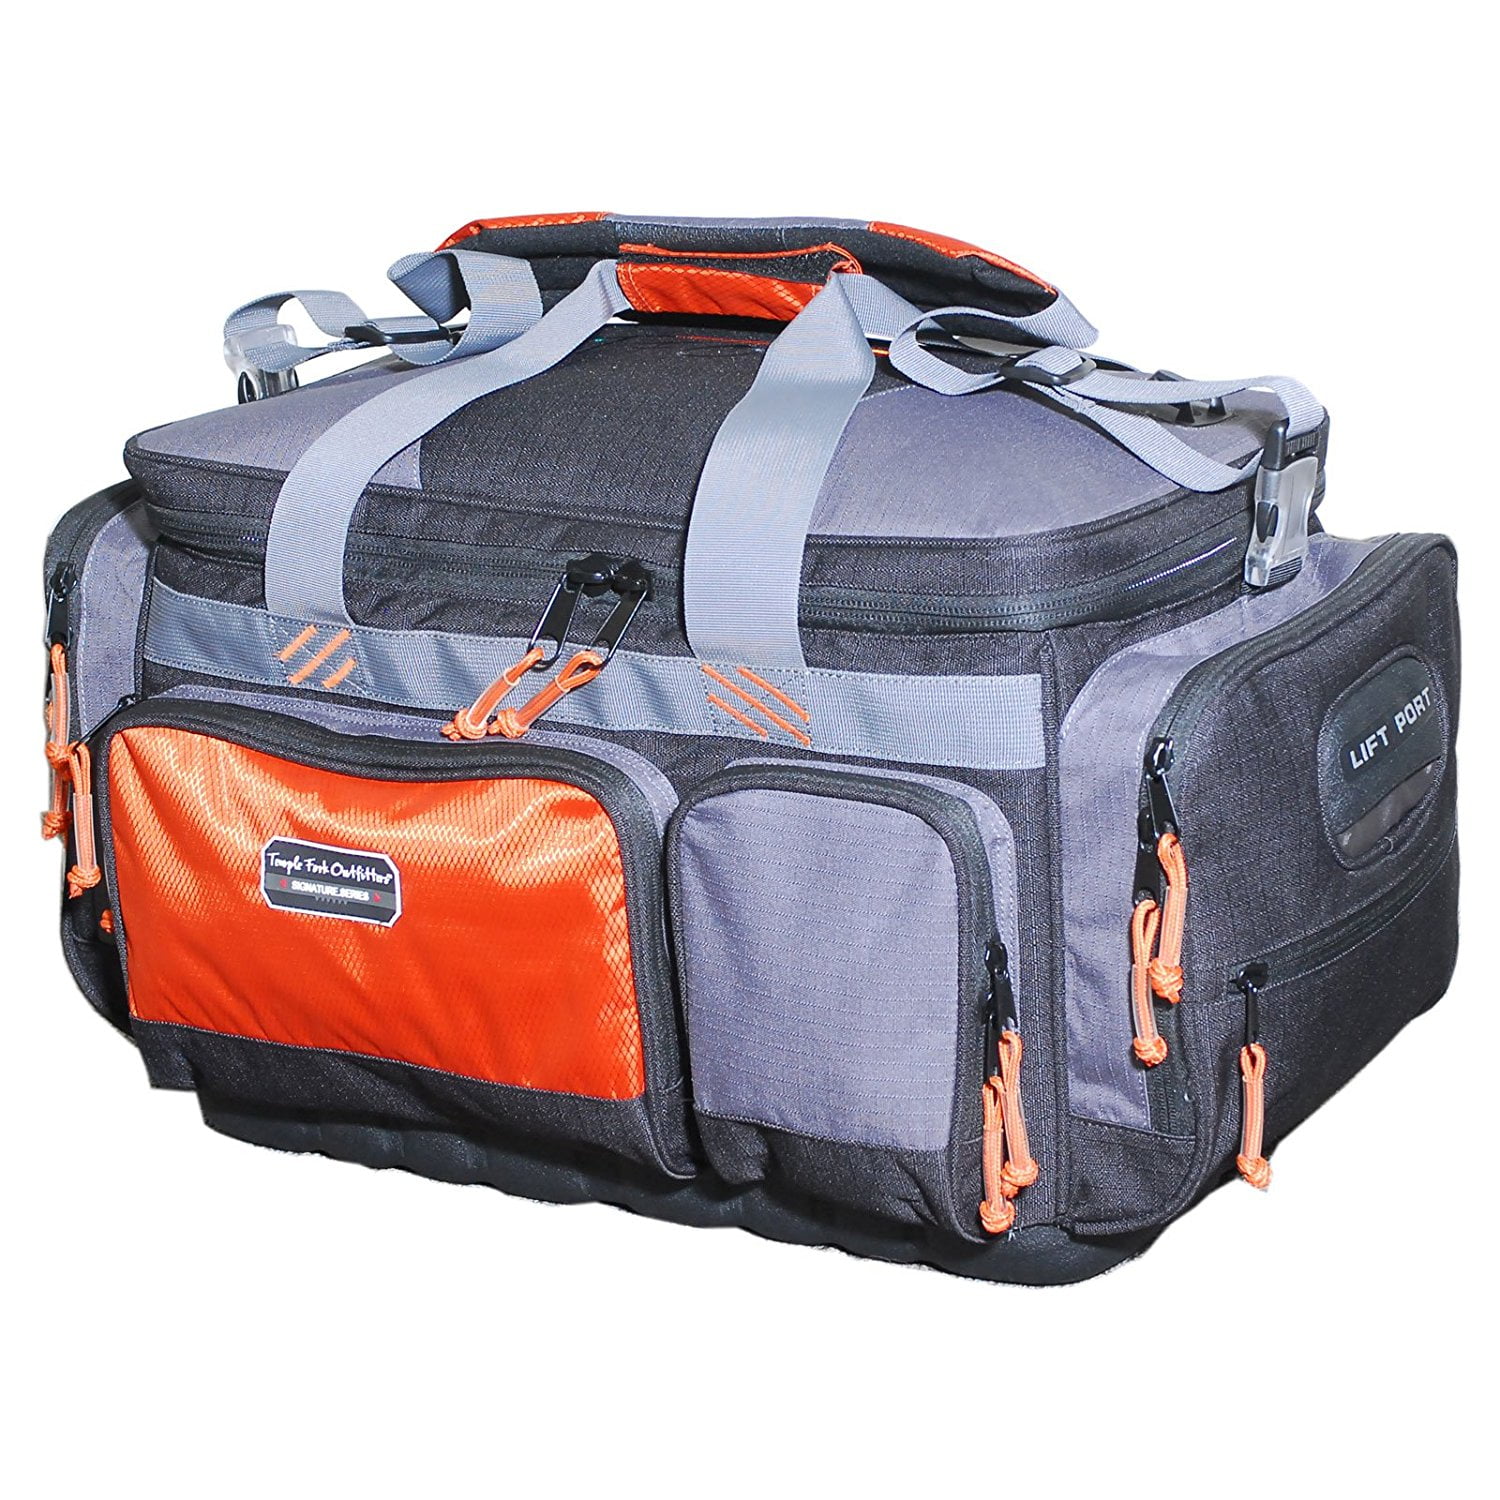 TFO Carry-On Fly Fishing Bag-Large Size 21 x 12 x 11 